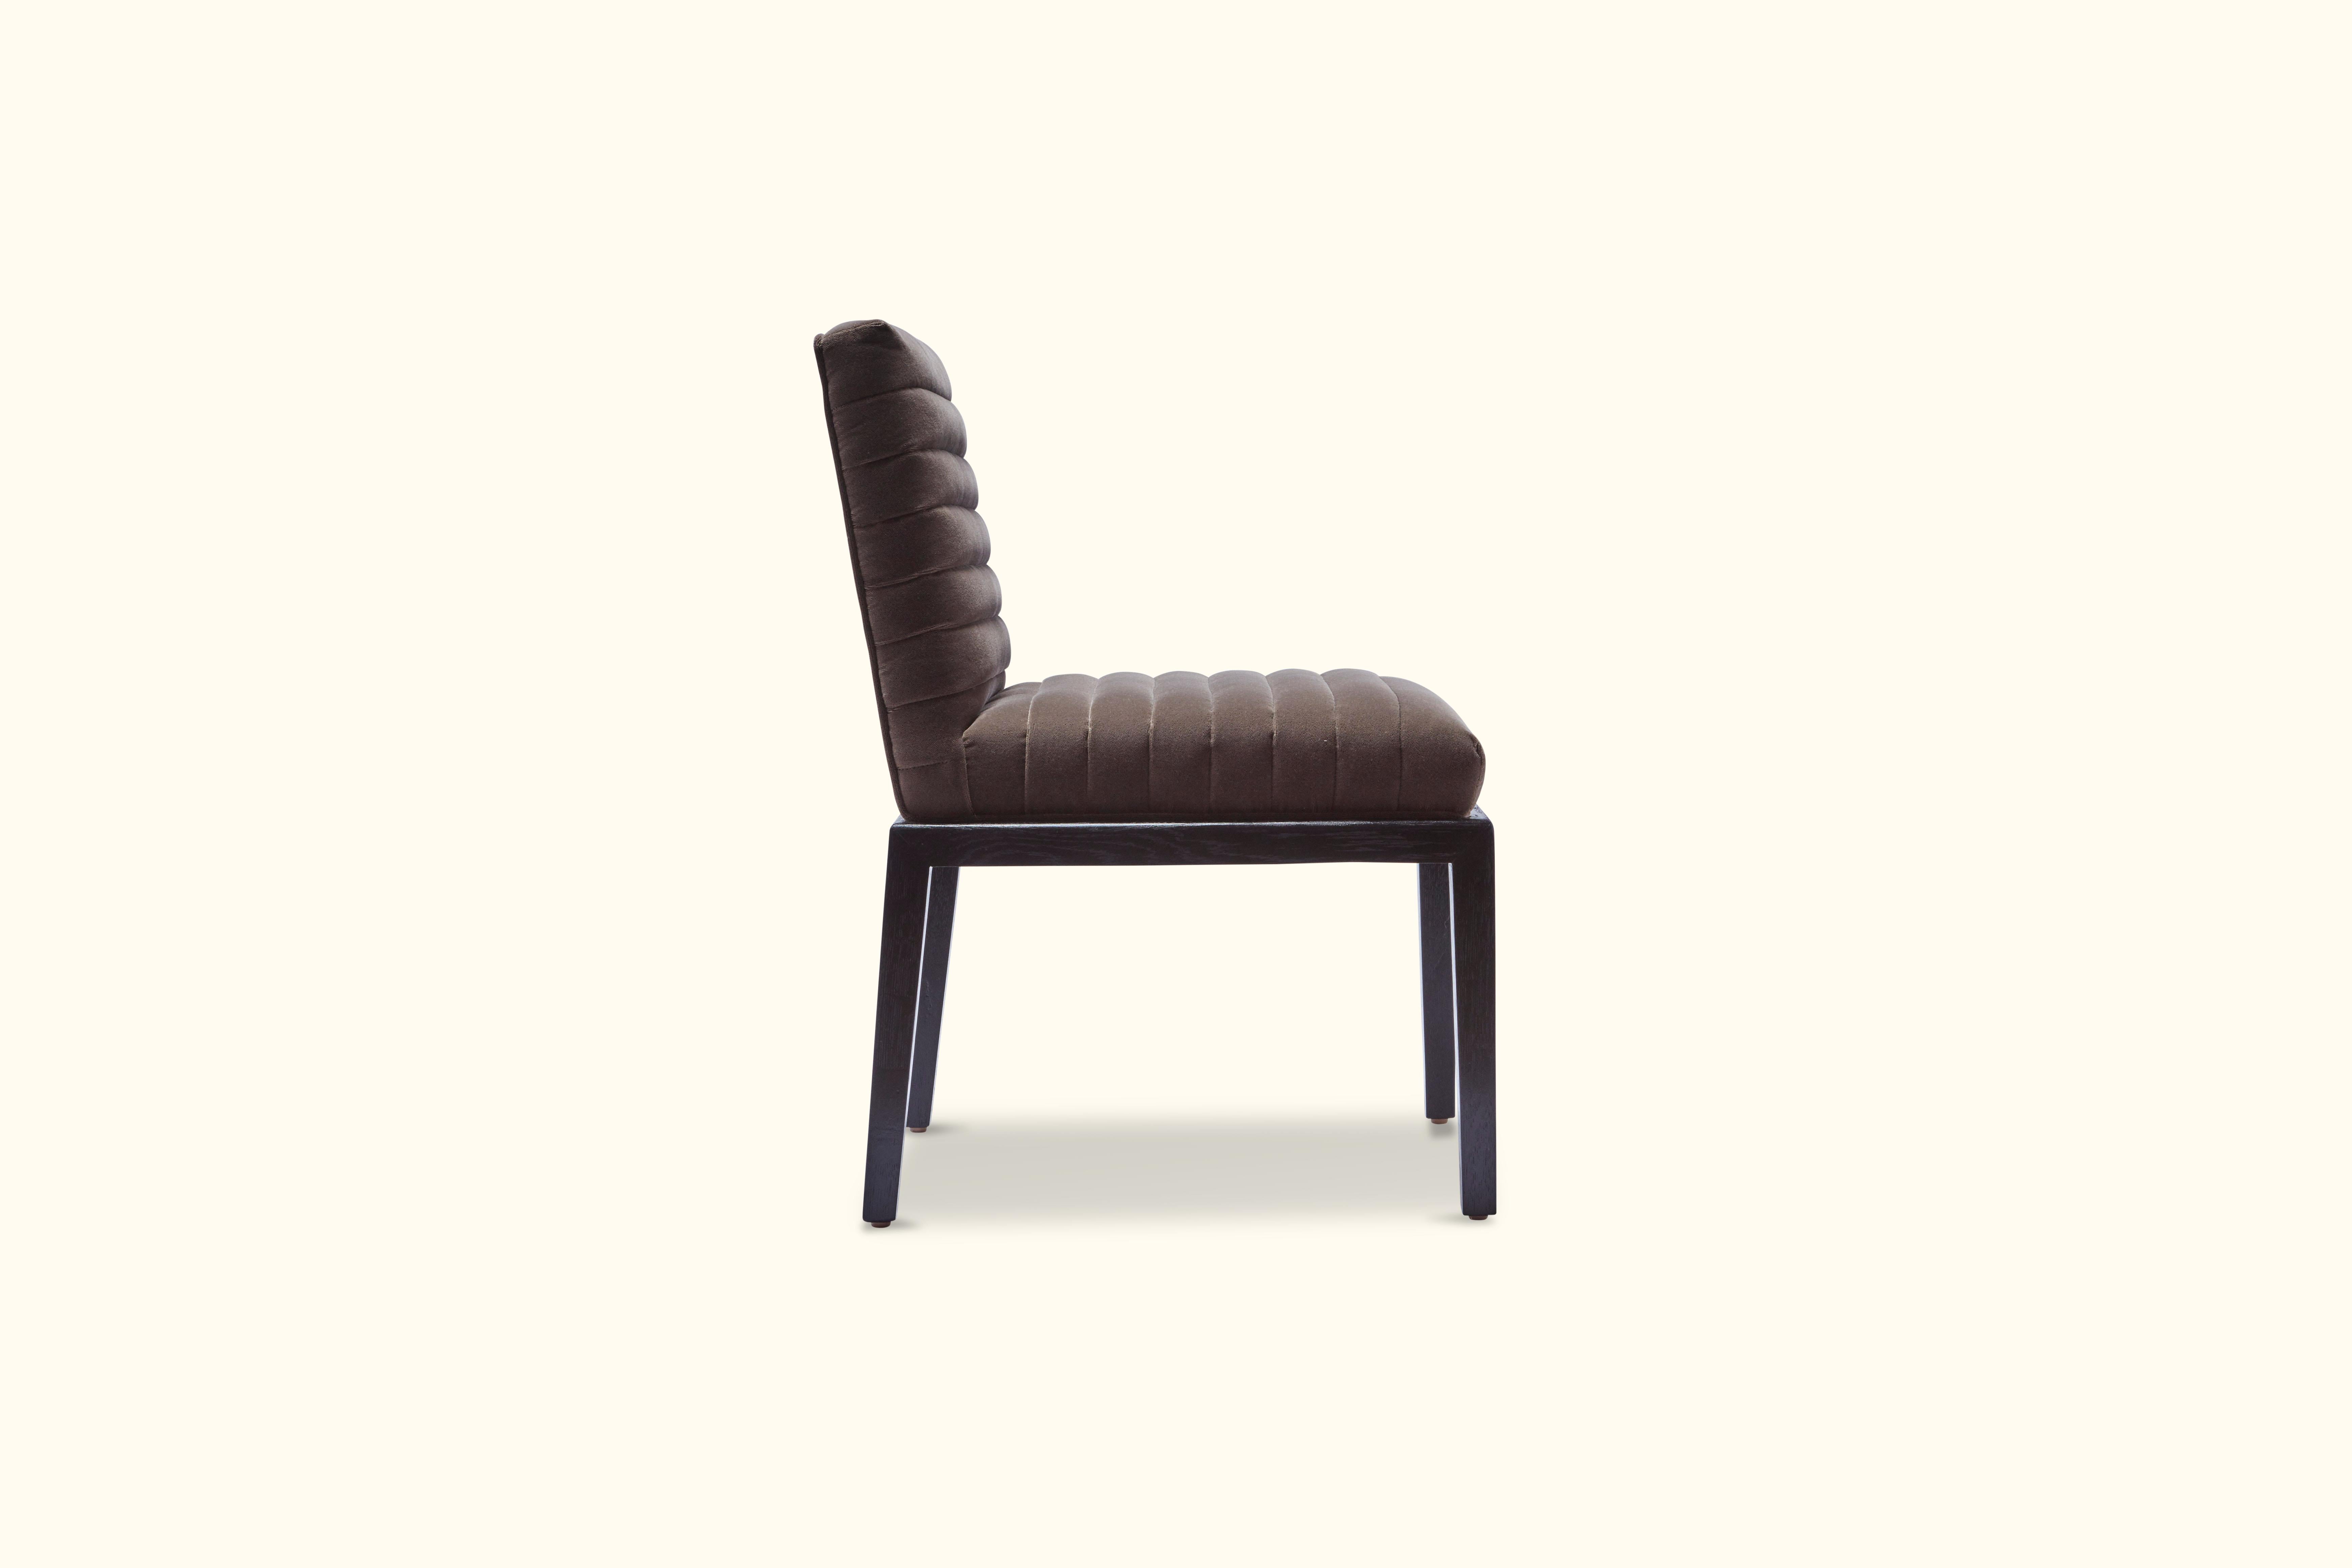 American Shoreland Chair, Lowback by Brian Paquette for Lawson-Fenning